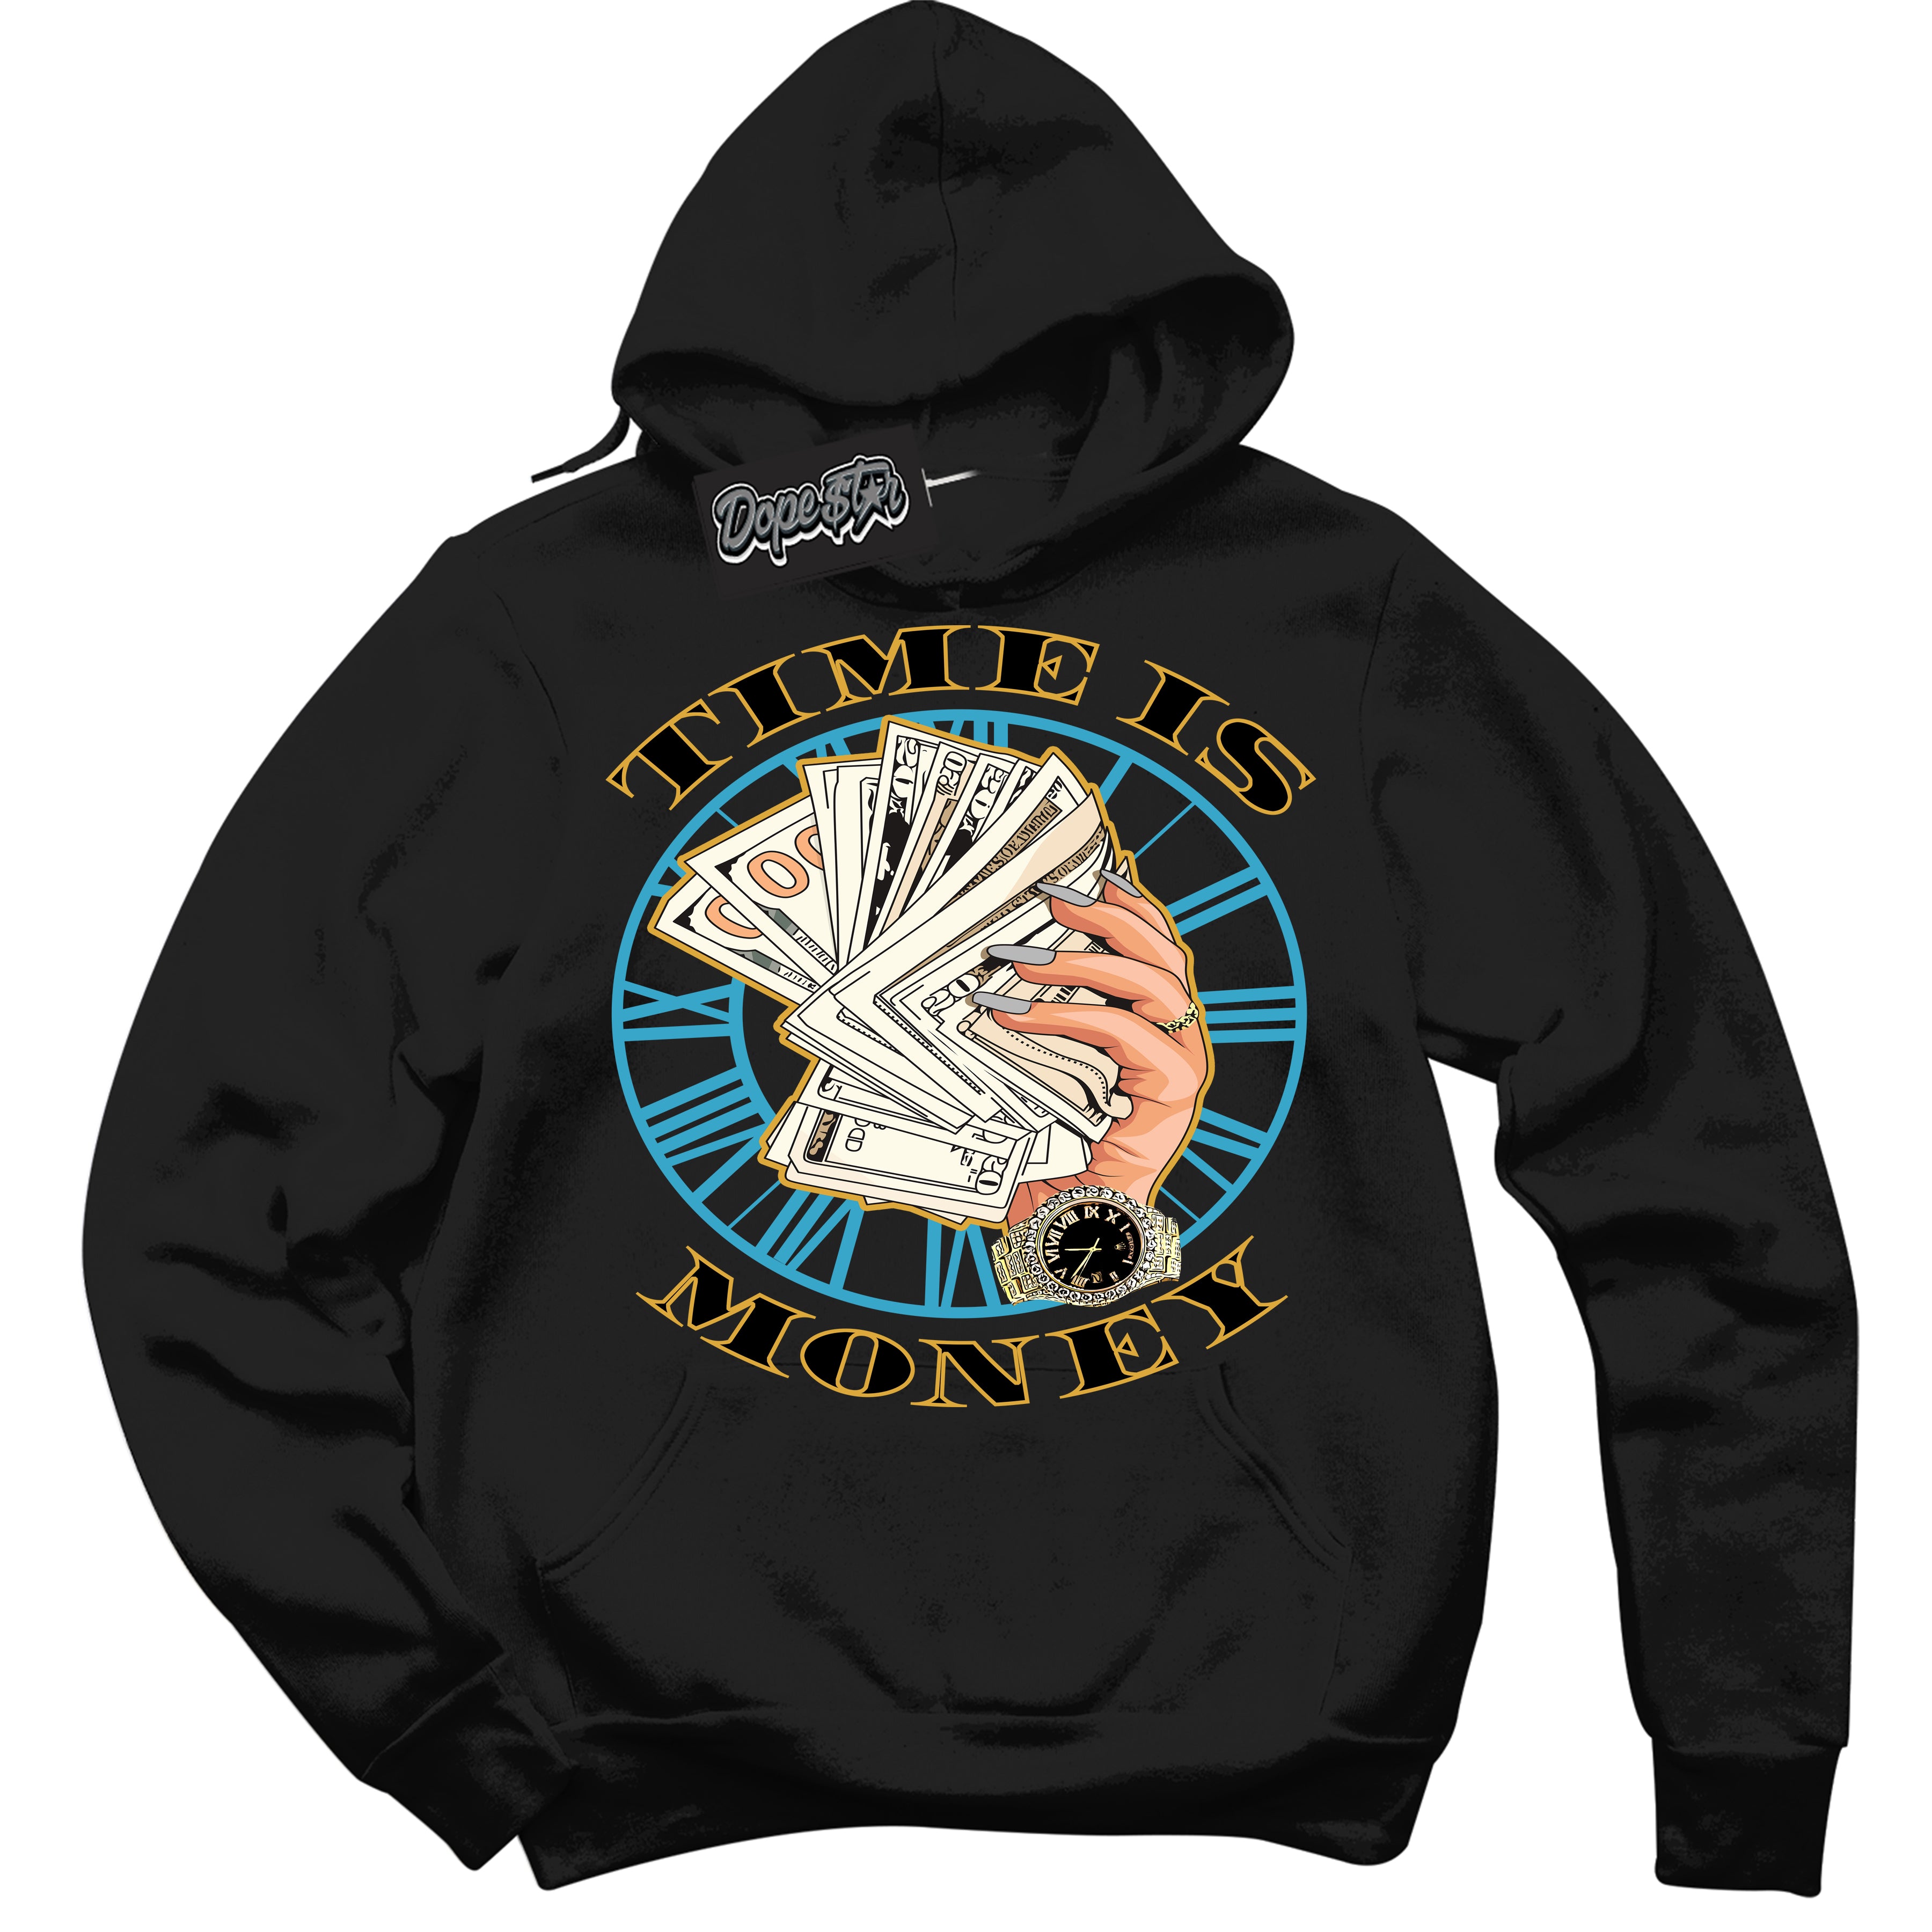 Cool Black Hoodie with “ Time Is Money ”  design that Perfectly Matches Aqua 5s Sneakers.